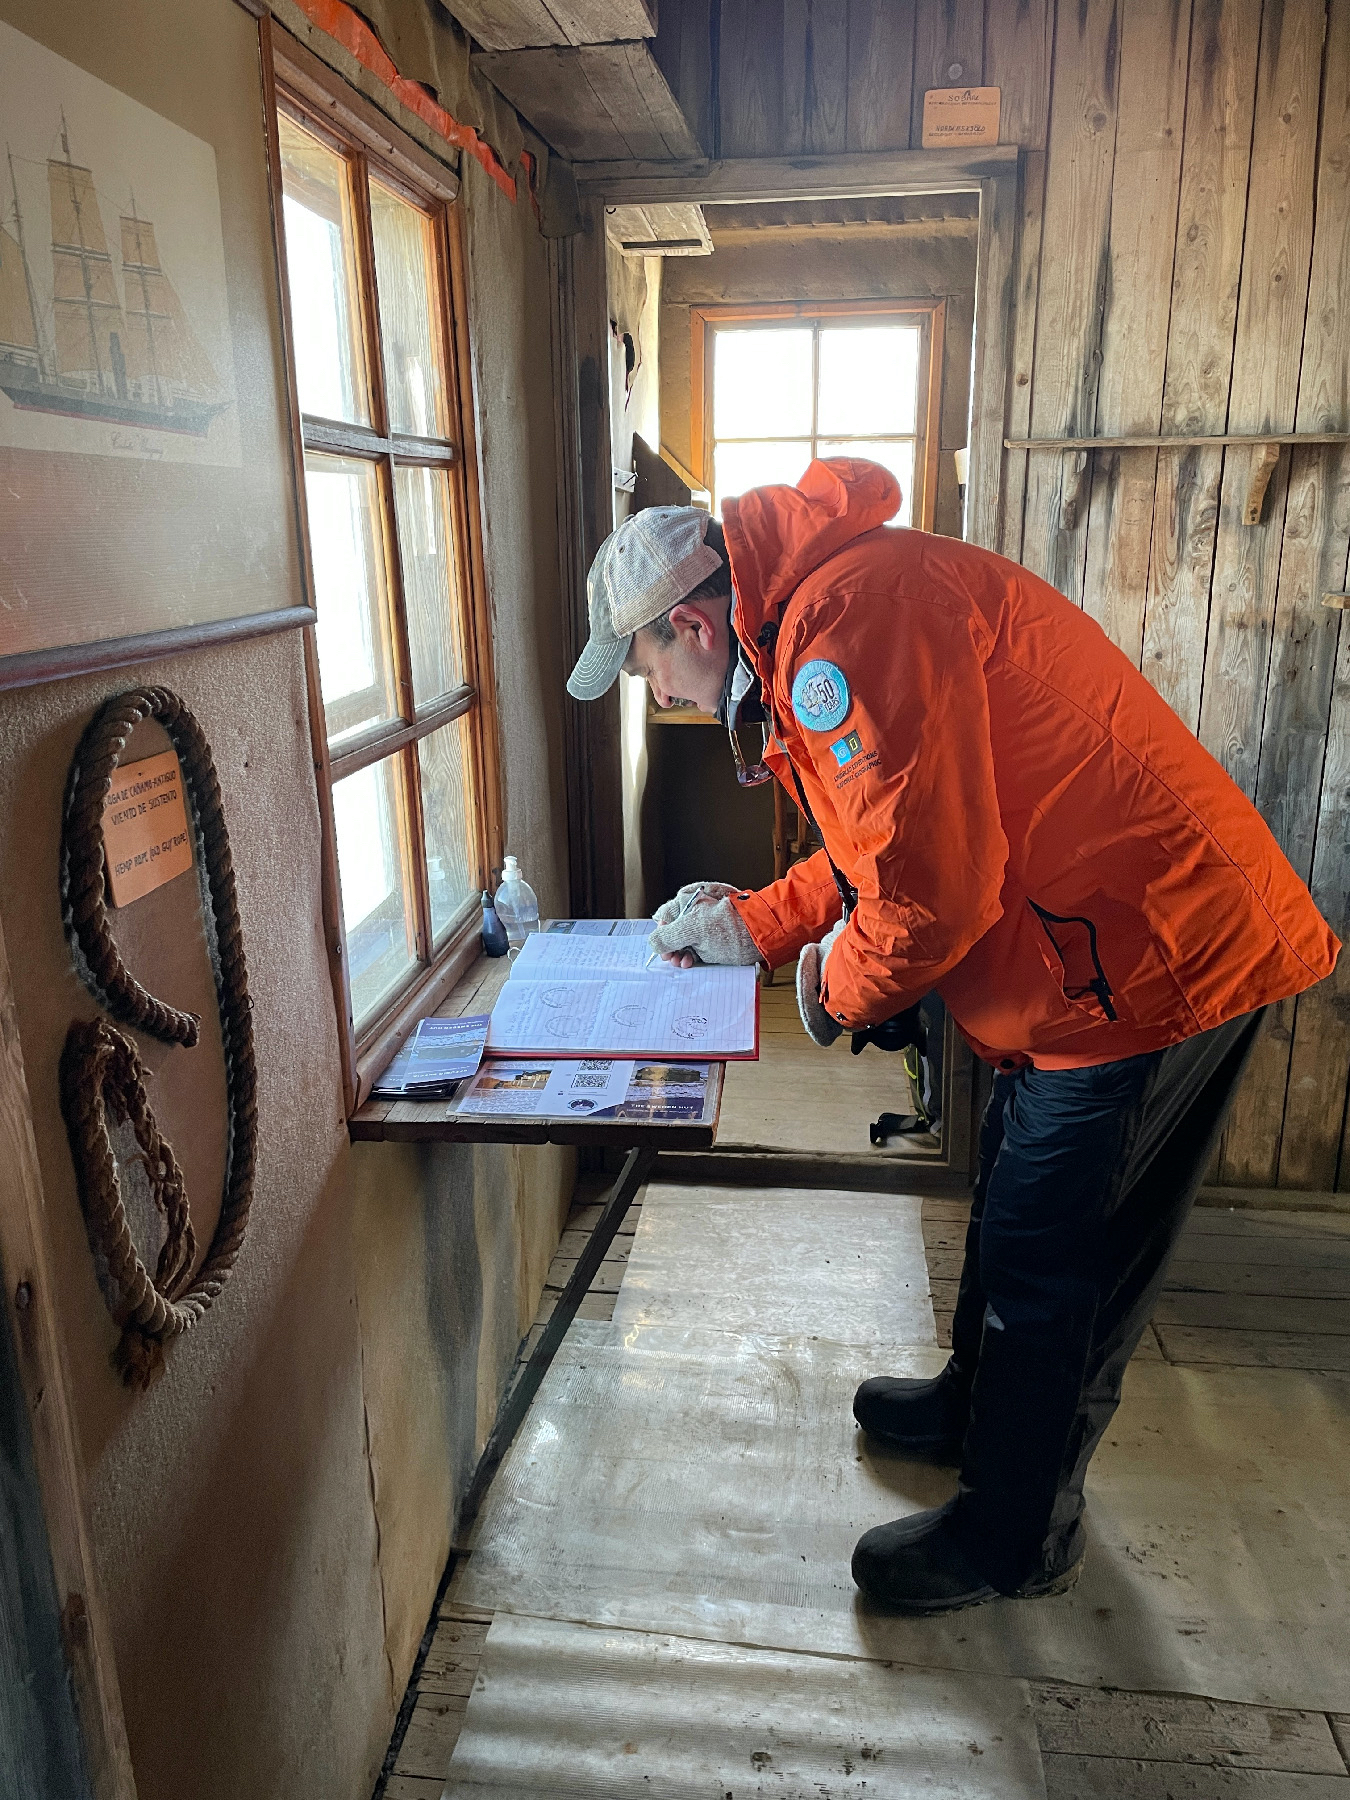 A visitor signs the guest log in tiny Nordenskjold's Hut on Snow Island in Antarctica where six researchers in the Heroic Age of Antarctica Exploration were stuck for 22 months.